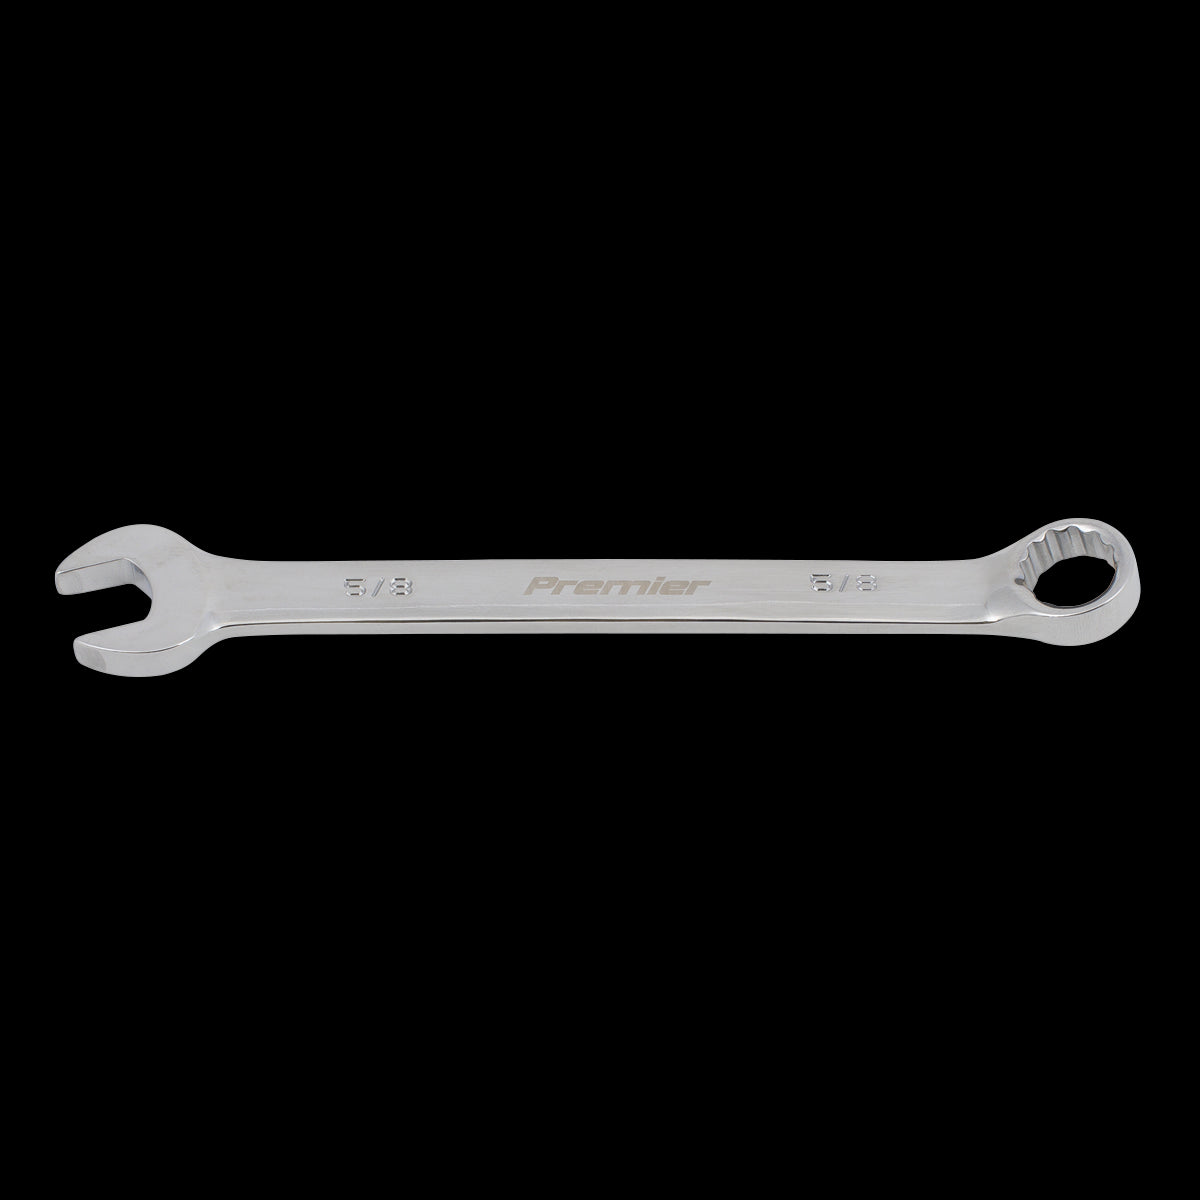 Sealey Premier Combination Spanner 5/8" - Imperial